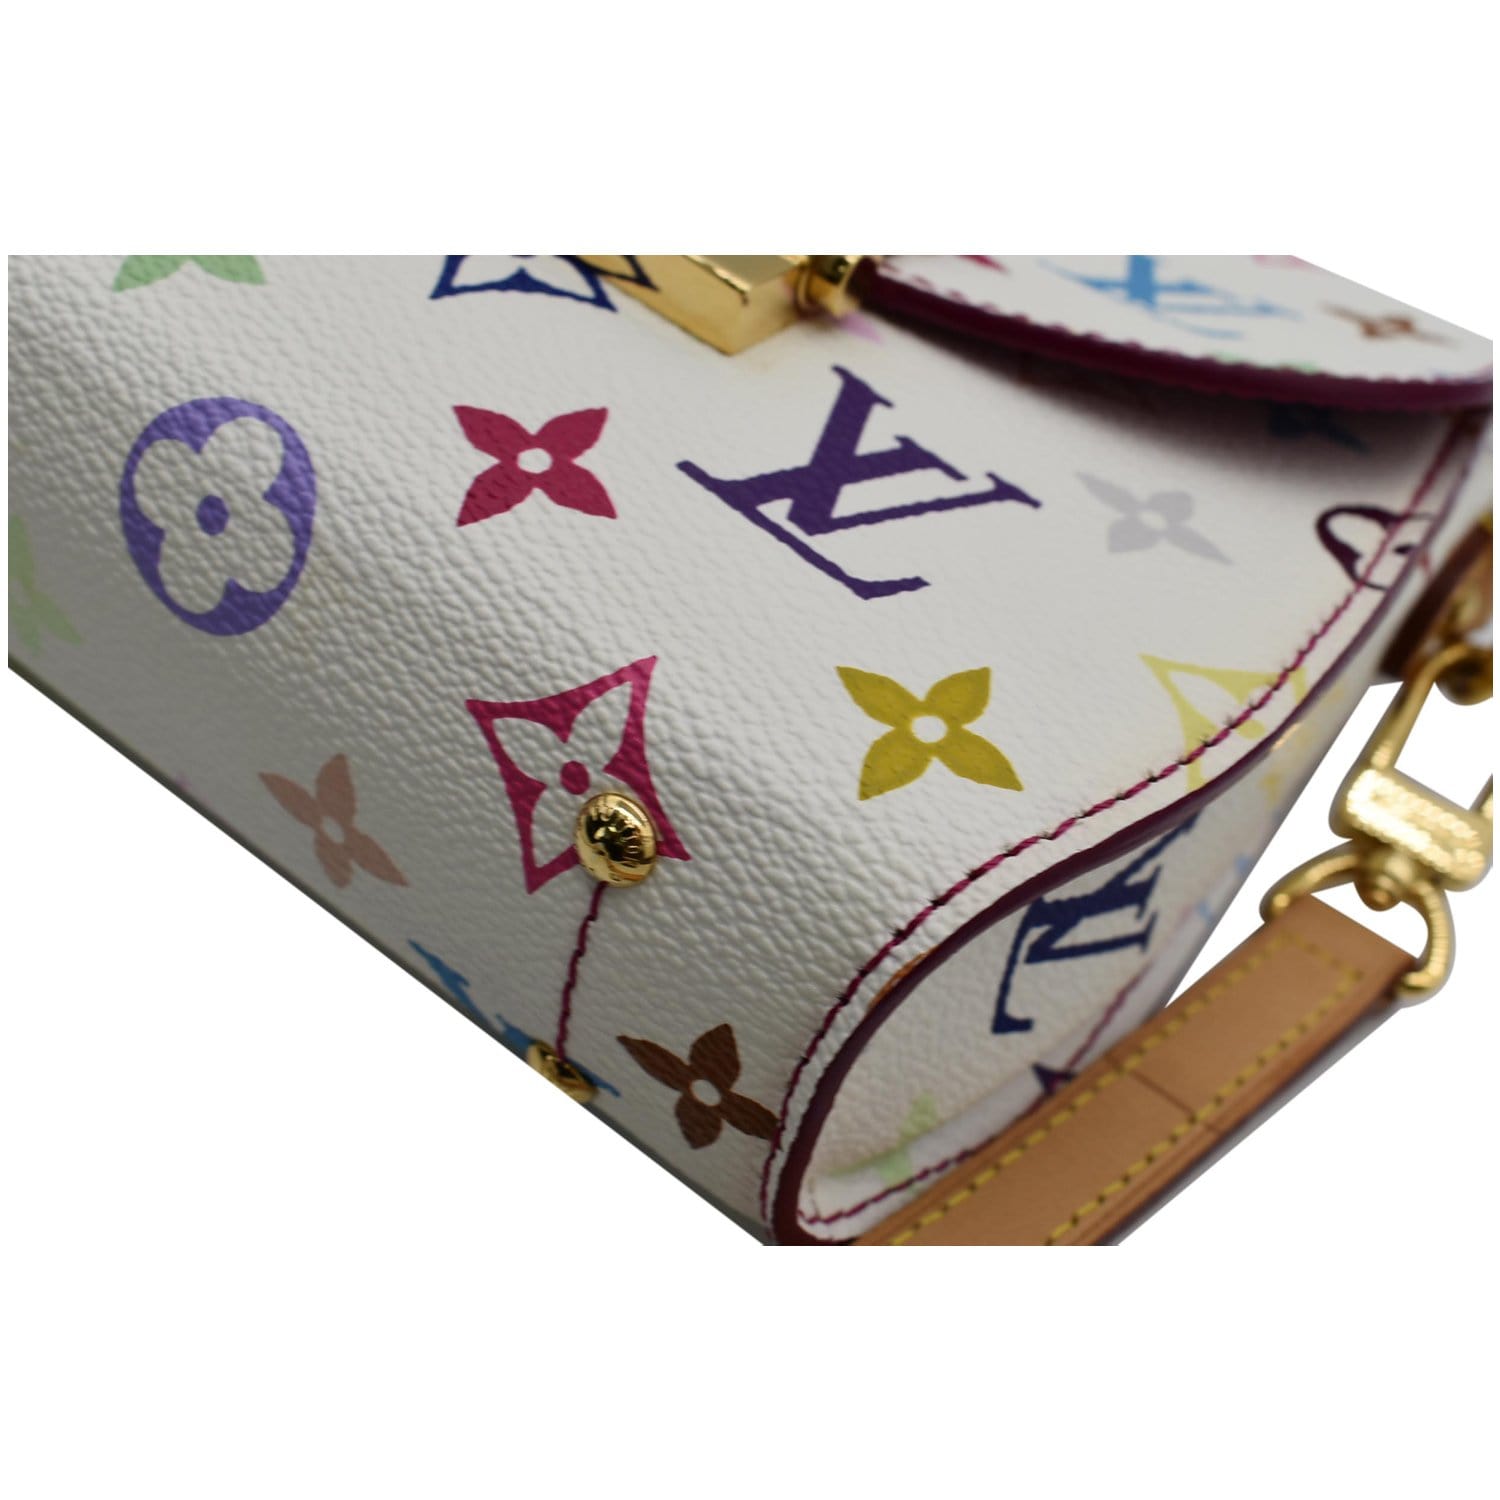 louis vuitton small bags for women clearance outlet multicolour